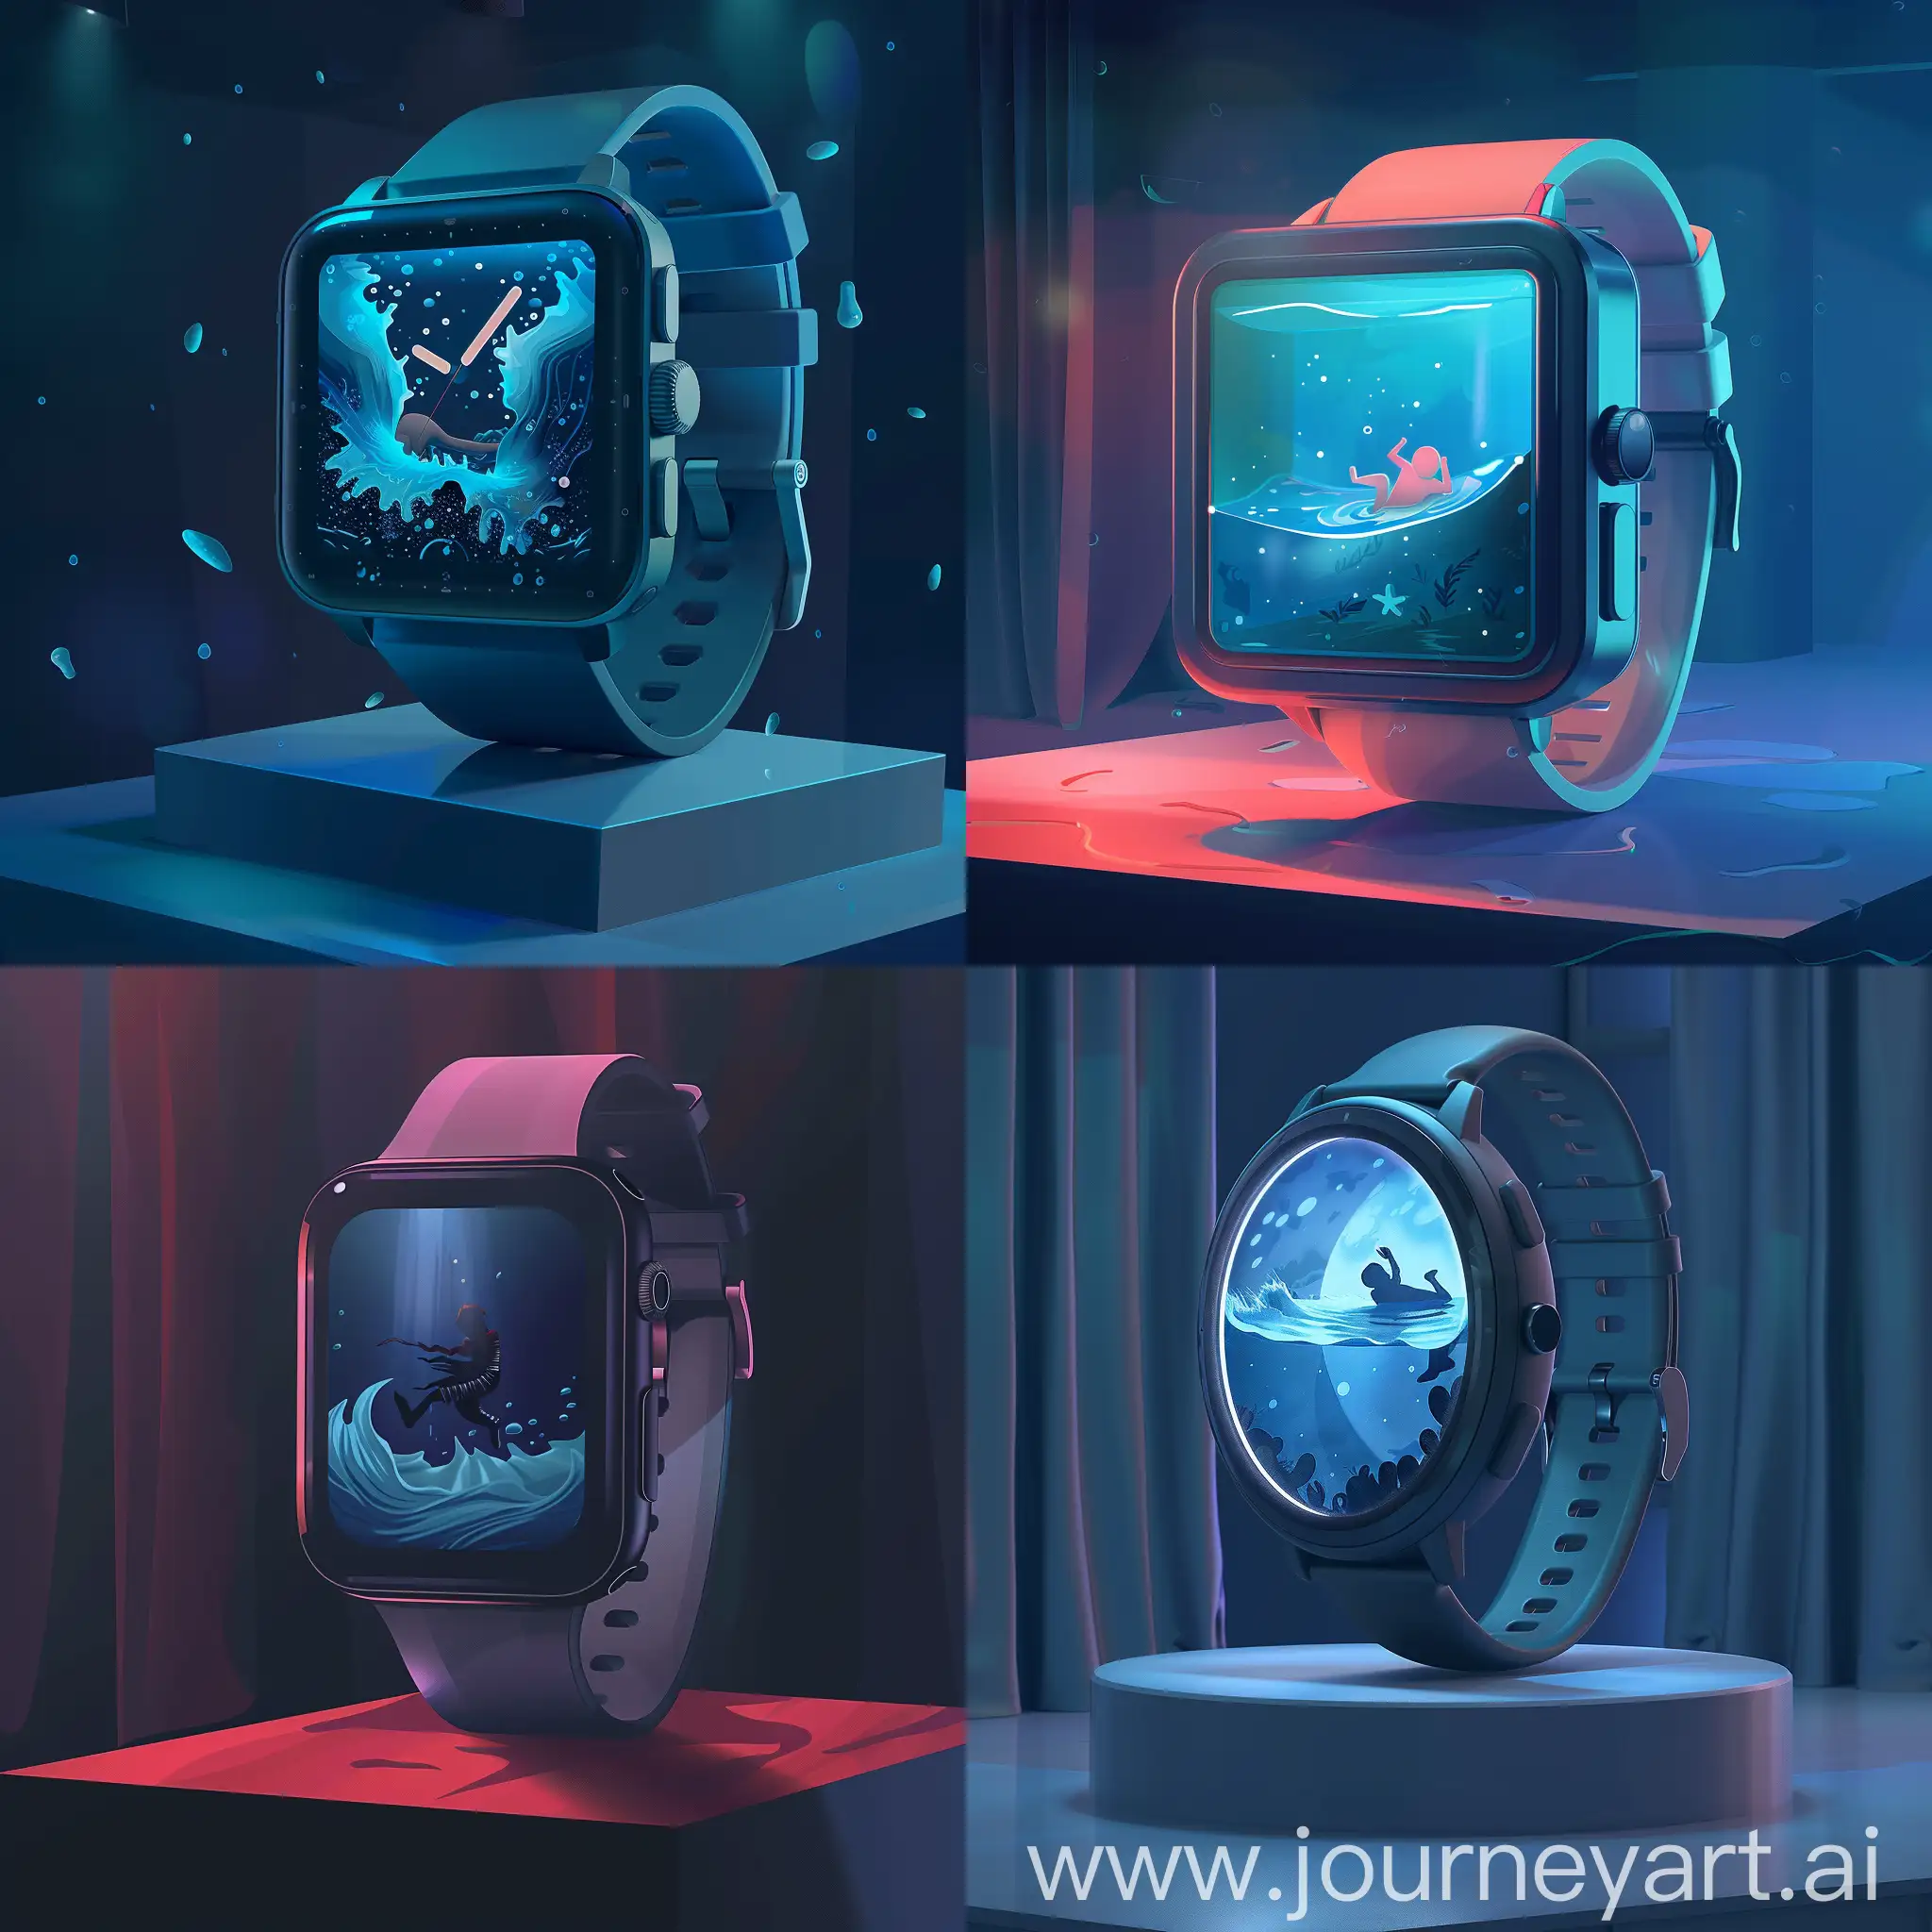 Immersive-Seathemed-Smart-Watch-Stage-with-Realistic-Drowning-Person